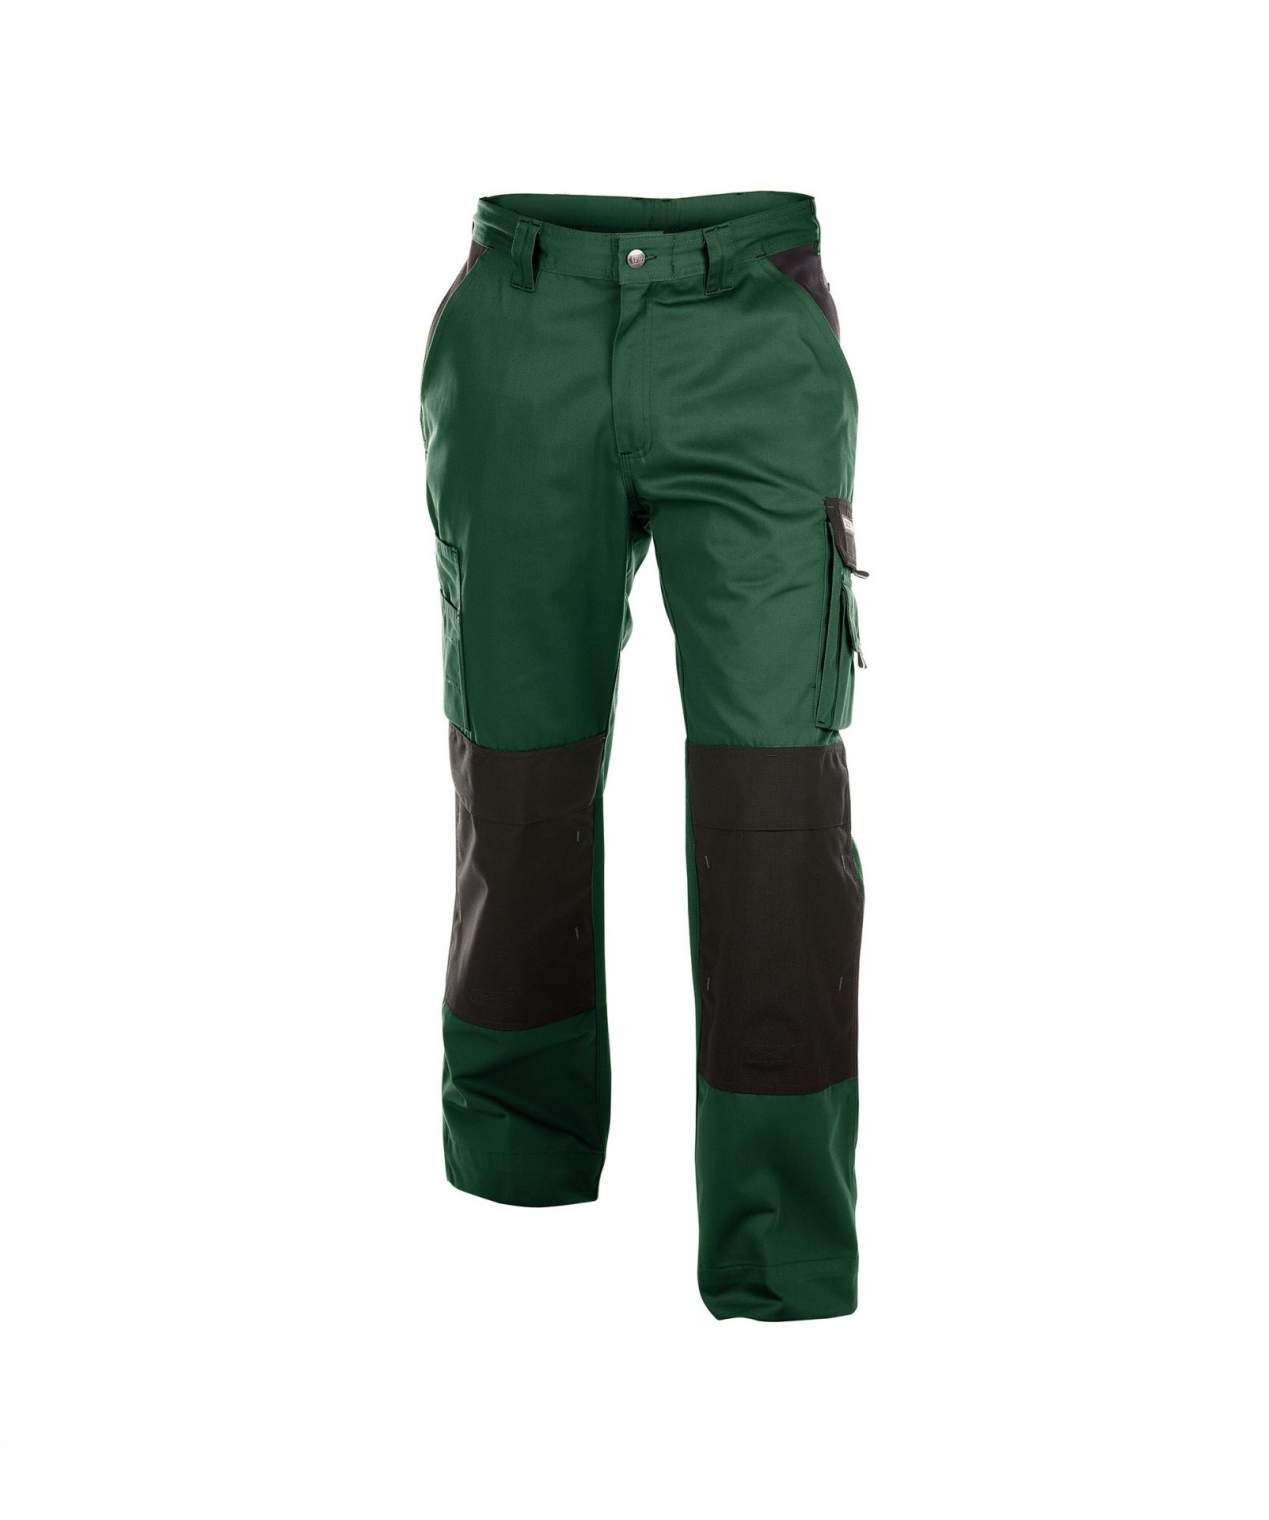 boston two tone work trousers with knee pockets bottle green black front